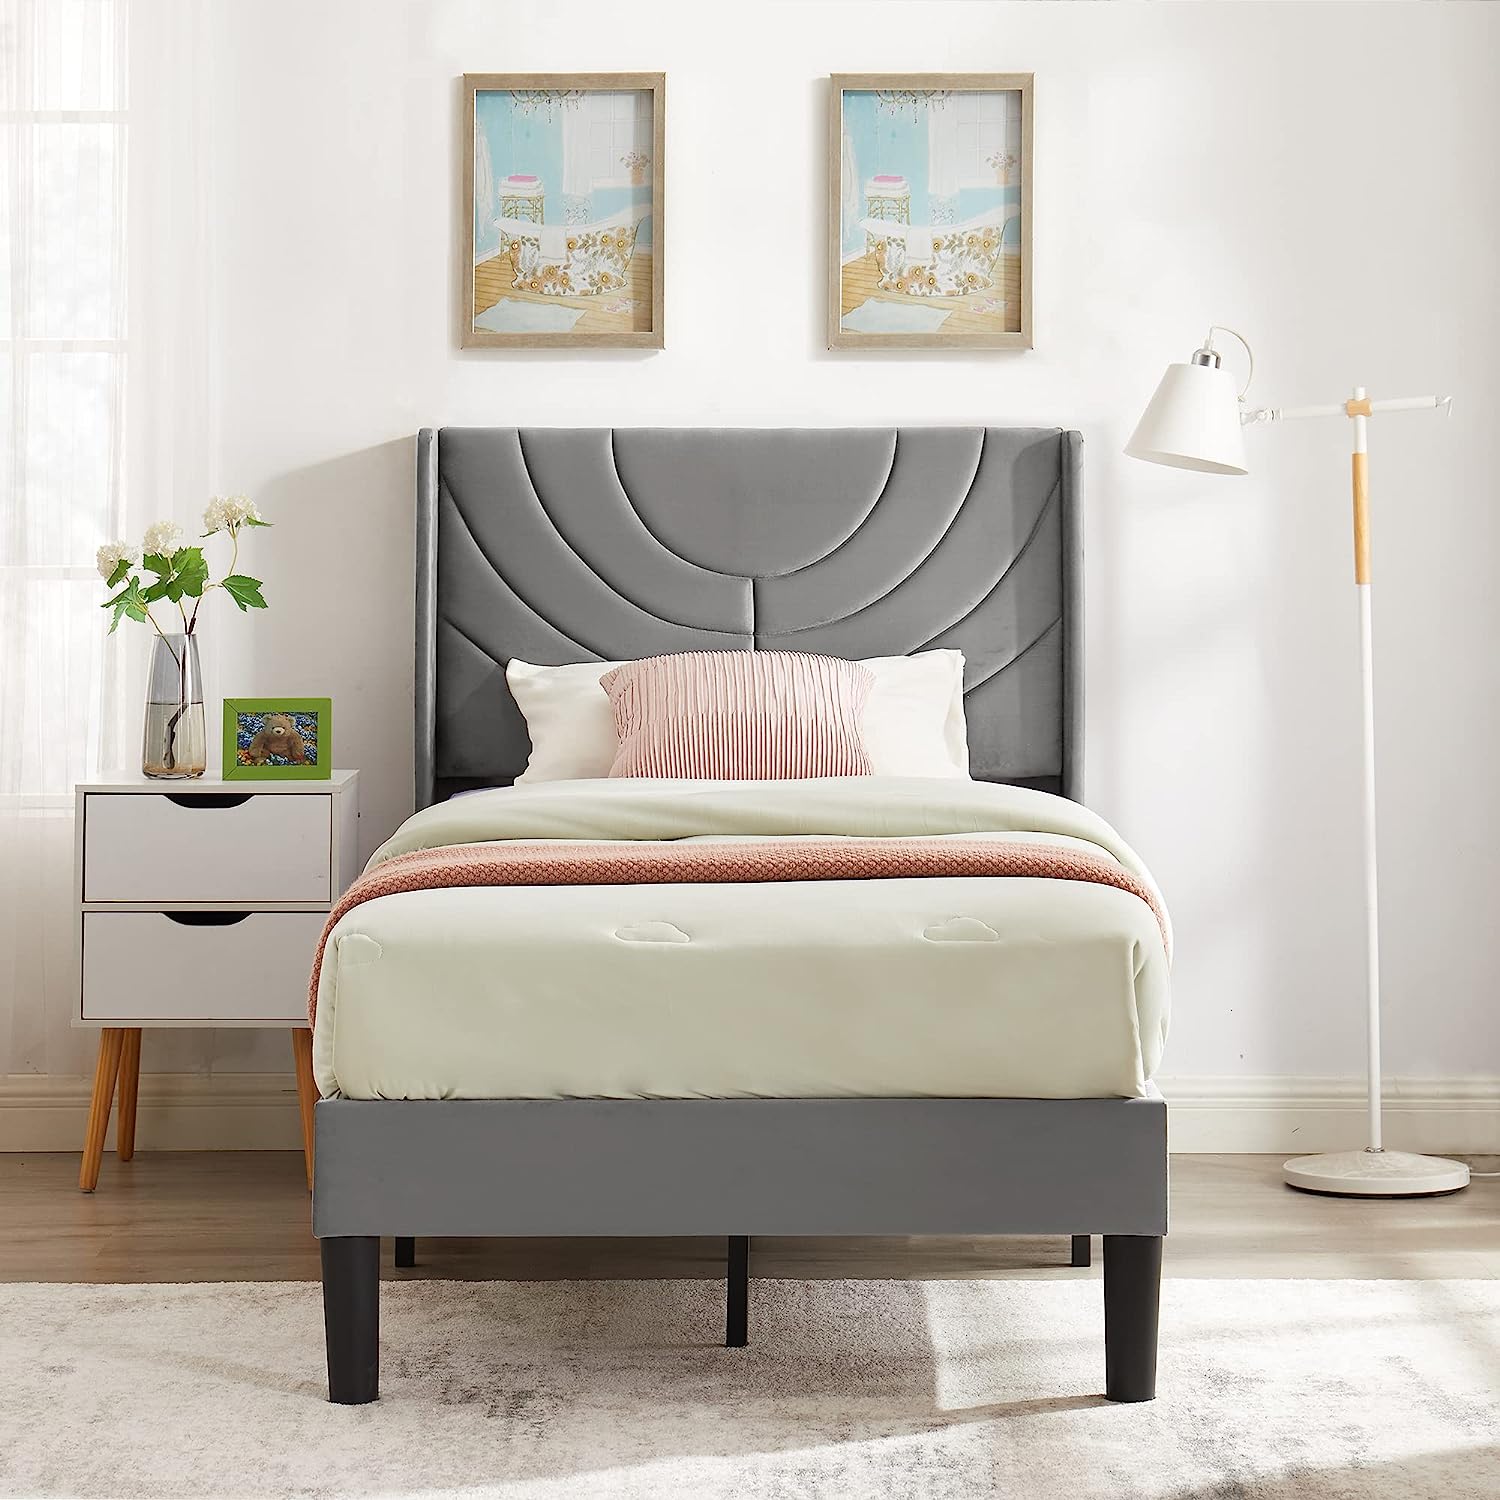 VECELO Upholstered Platform Bed Frame with Adjustable Fabric Headboard, Twin/Full/Queen size